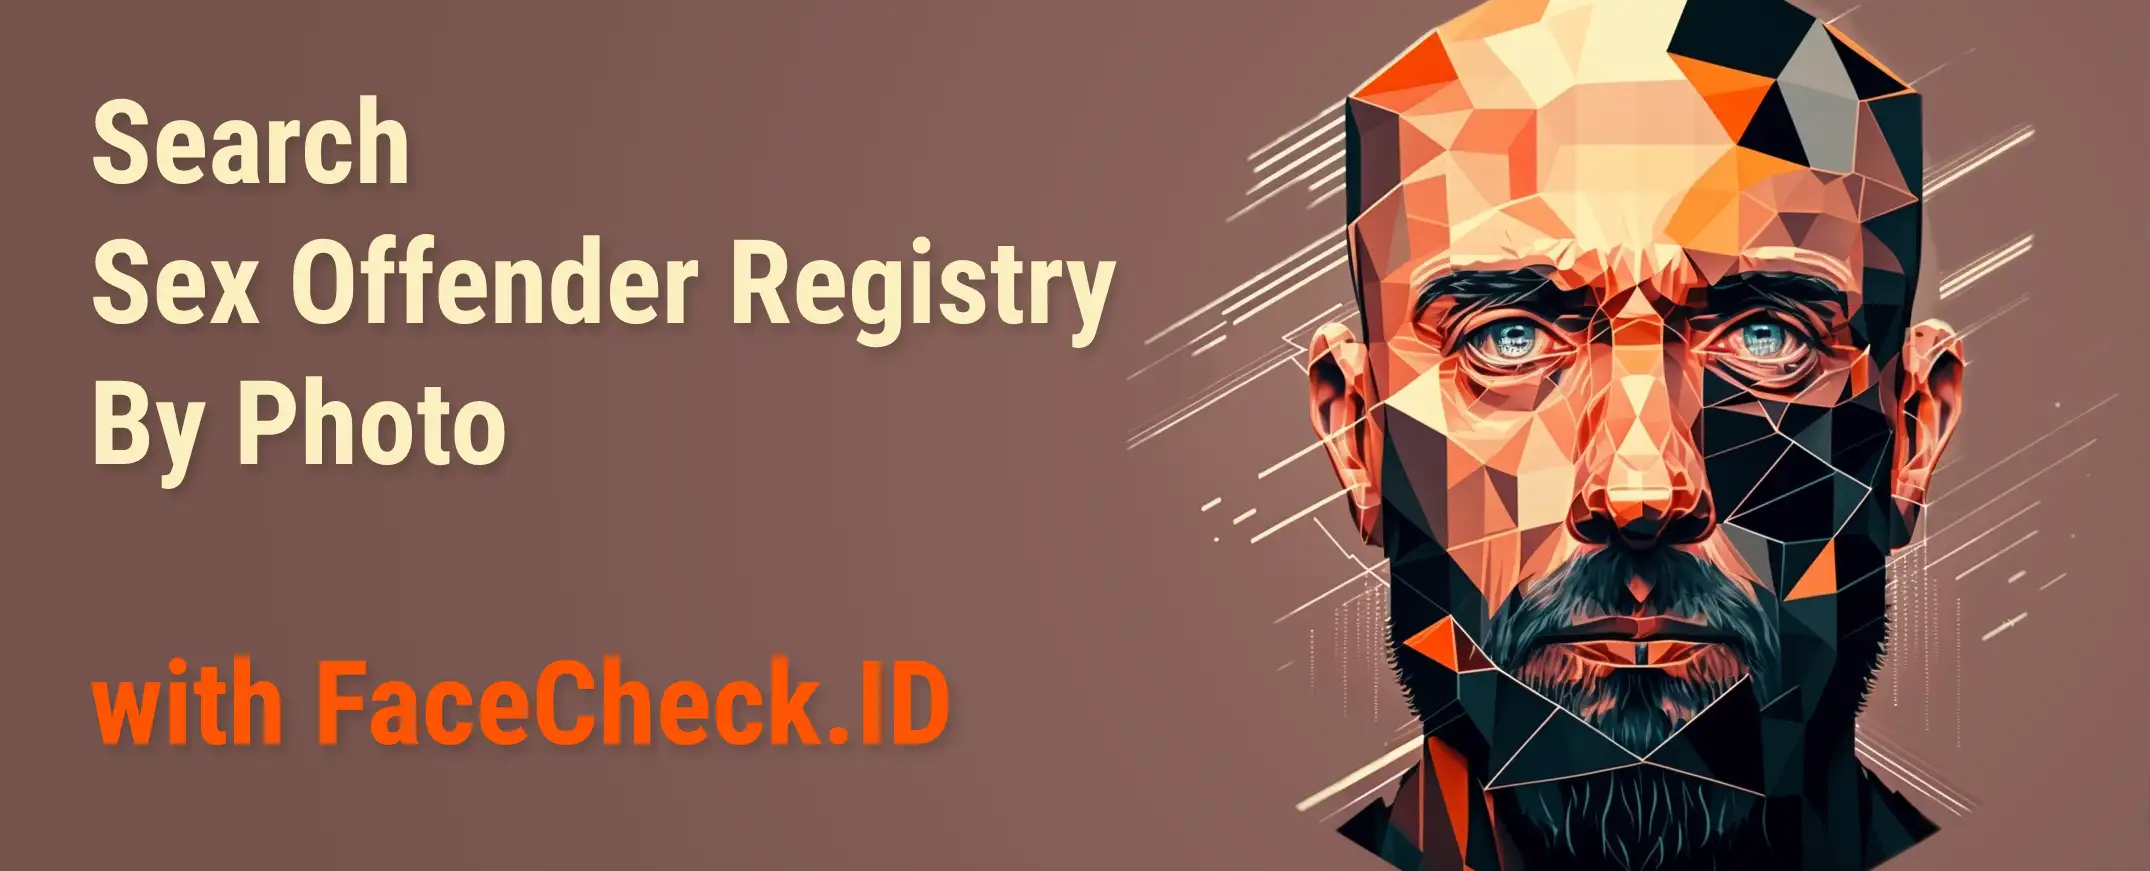 A Step-by-Step Guide on How to Search Sex Offender Registry by Photo